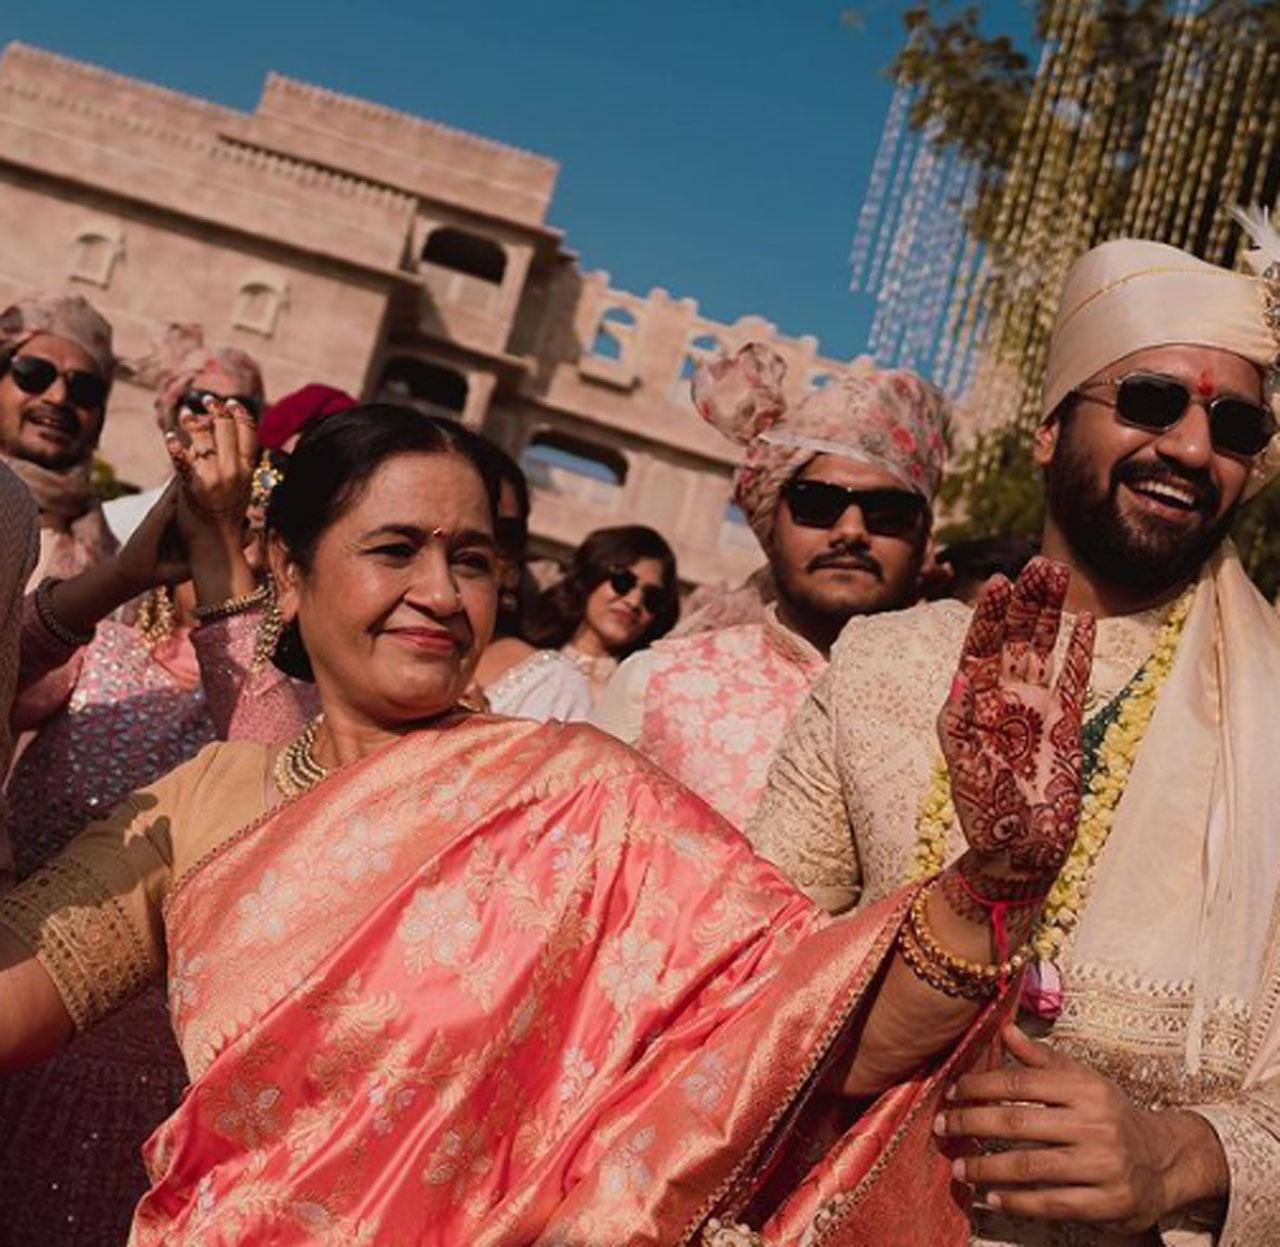 Actor Vicky Kaushal's wish for his mother and mother-in-law on Mother's Day is all things love. Taking to Instagram, Vicky took a stroll down memory lane and dropped a string of images from his wedding festivities with Katrina Kaif. One picture features his mother Veena dancing her heart out during the baraat. Another one shows Vicky and Katrina receiving blessings from the latter's mother Suzanne.